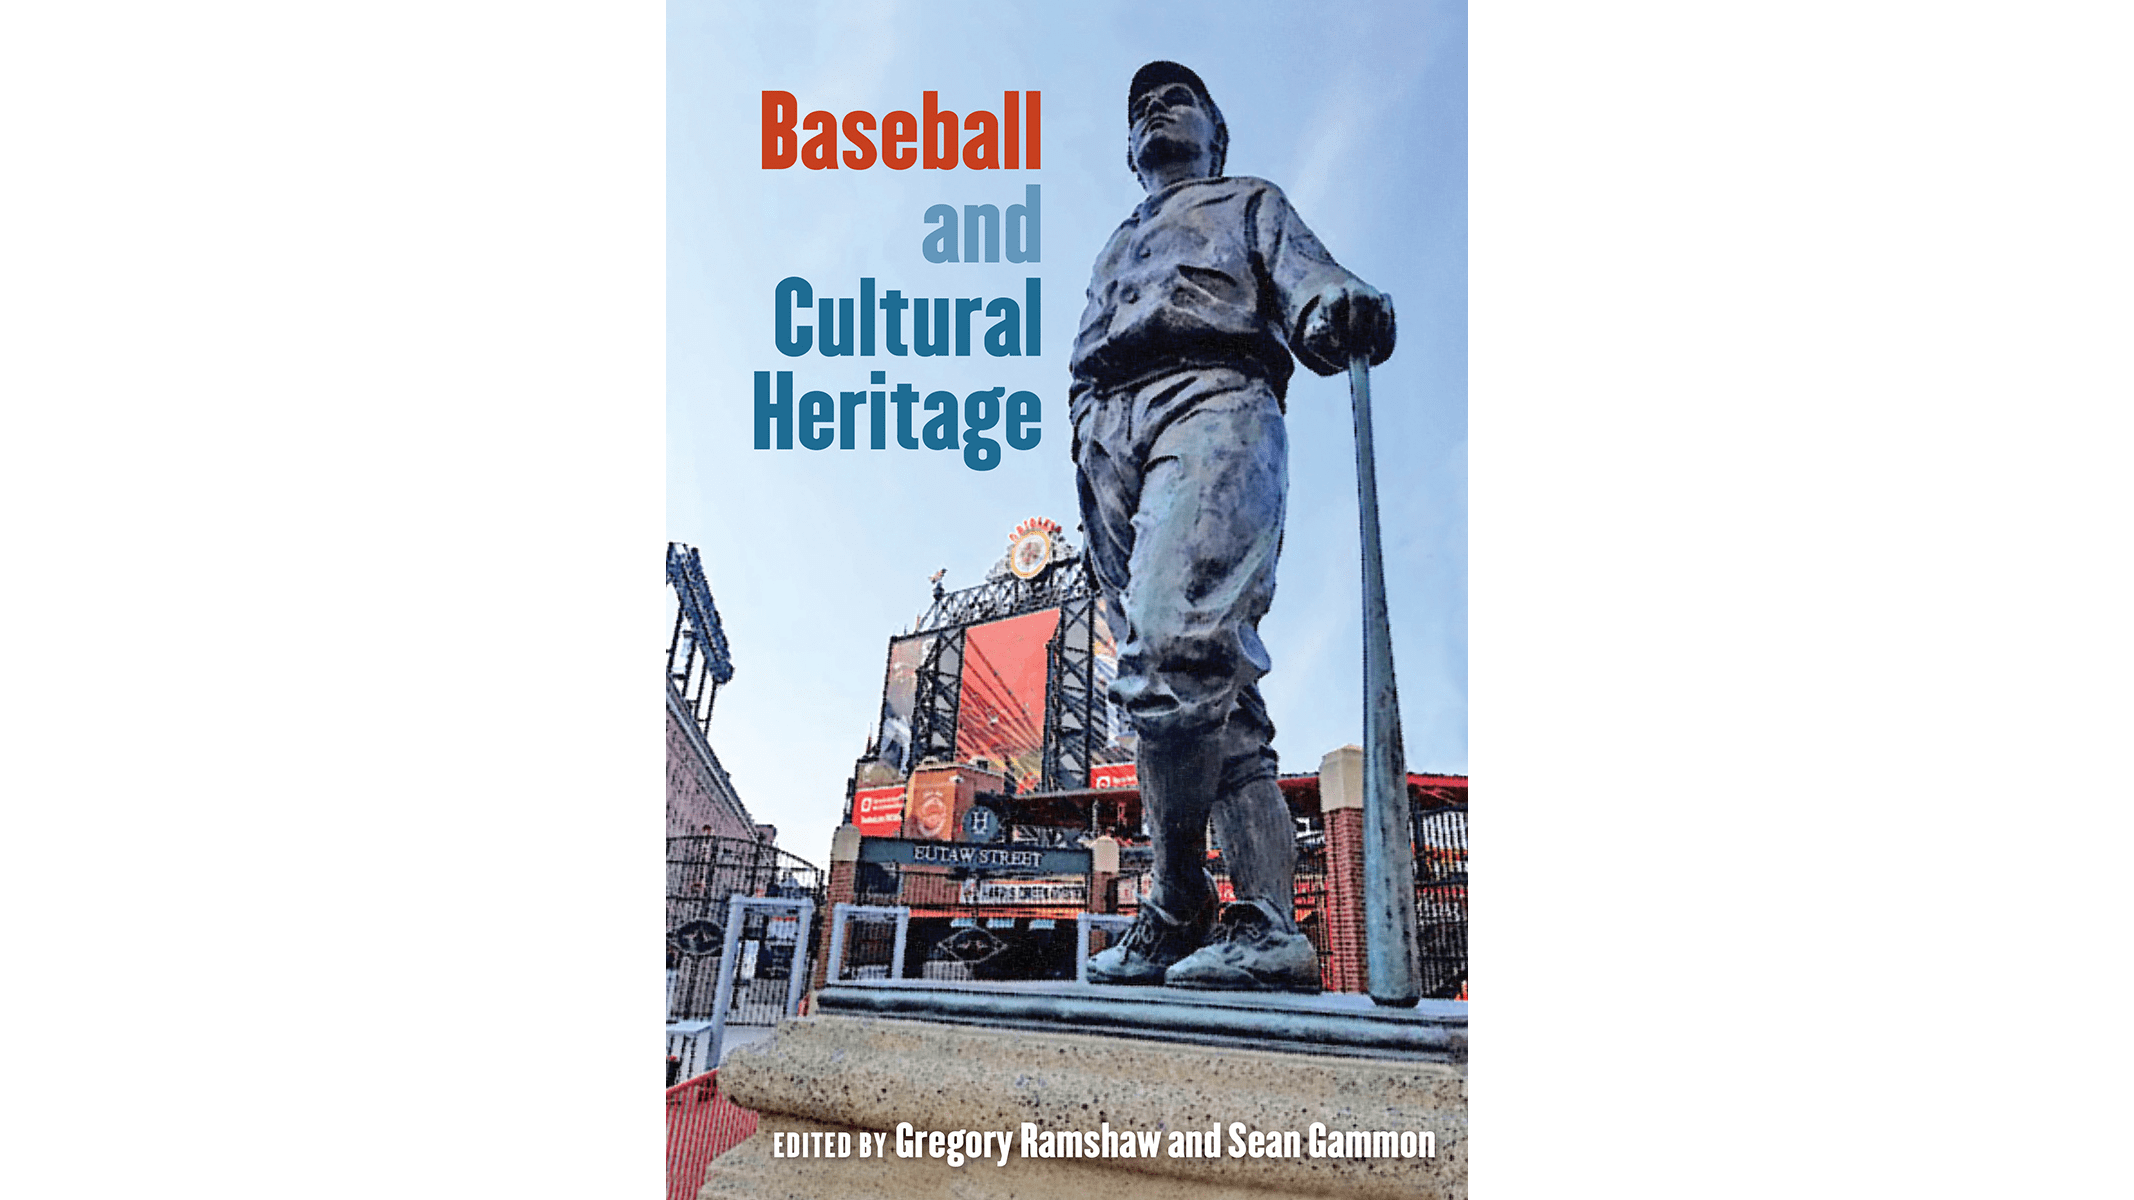 A front page of the book "Baseball and Cultural Heritage."